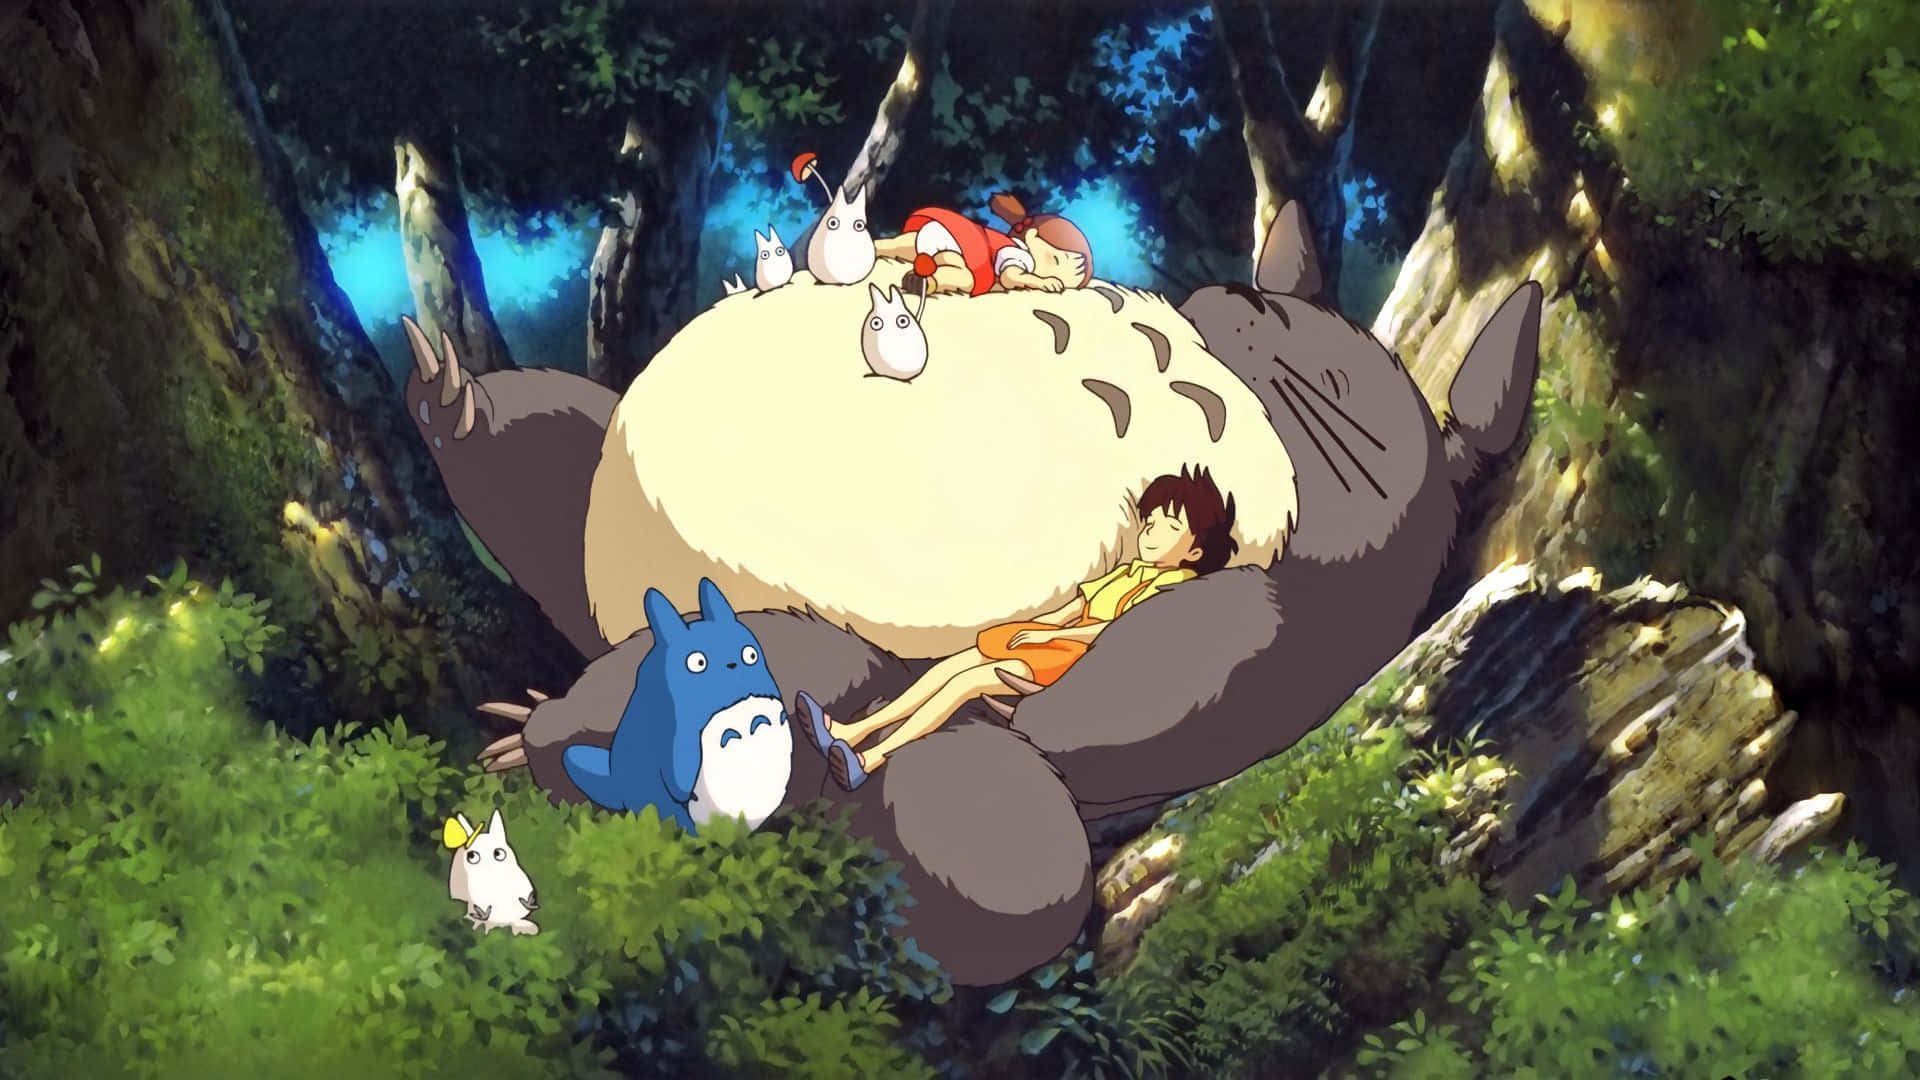 Caption: My Neighbor Totoro alongside friends in a whimsical forest setting Wallpaper